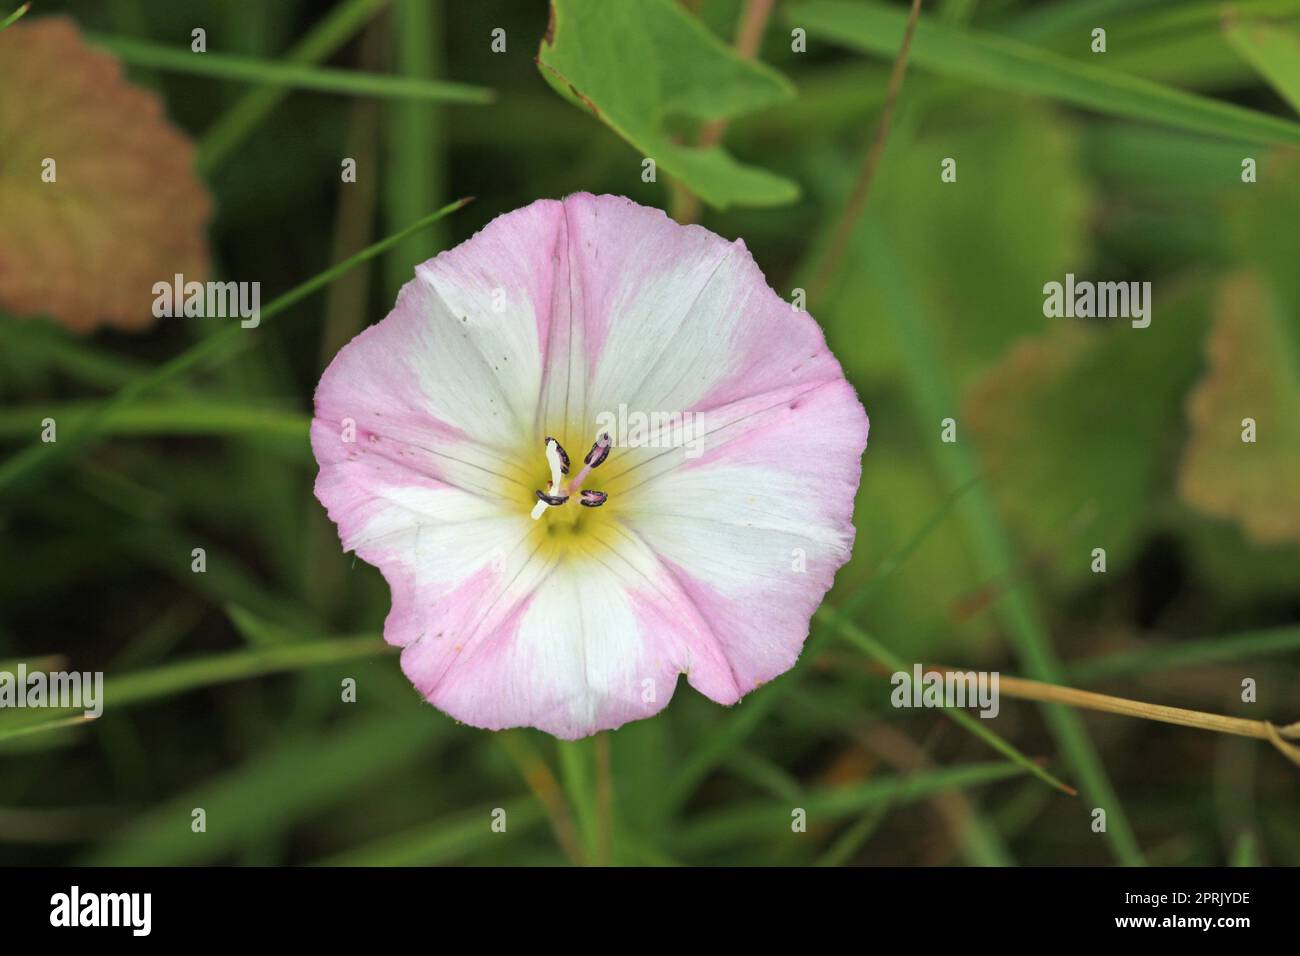 Field bindweed, Convolvulus arvensis, pink and white flower in close up with a blurred background of grass and leaves. Stock Photo